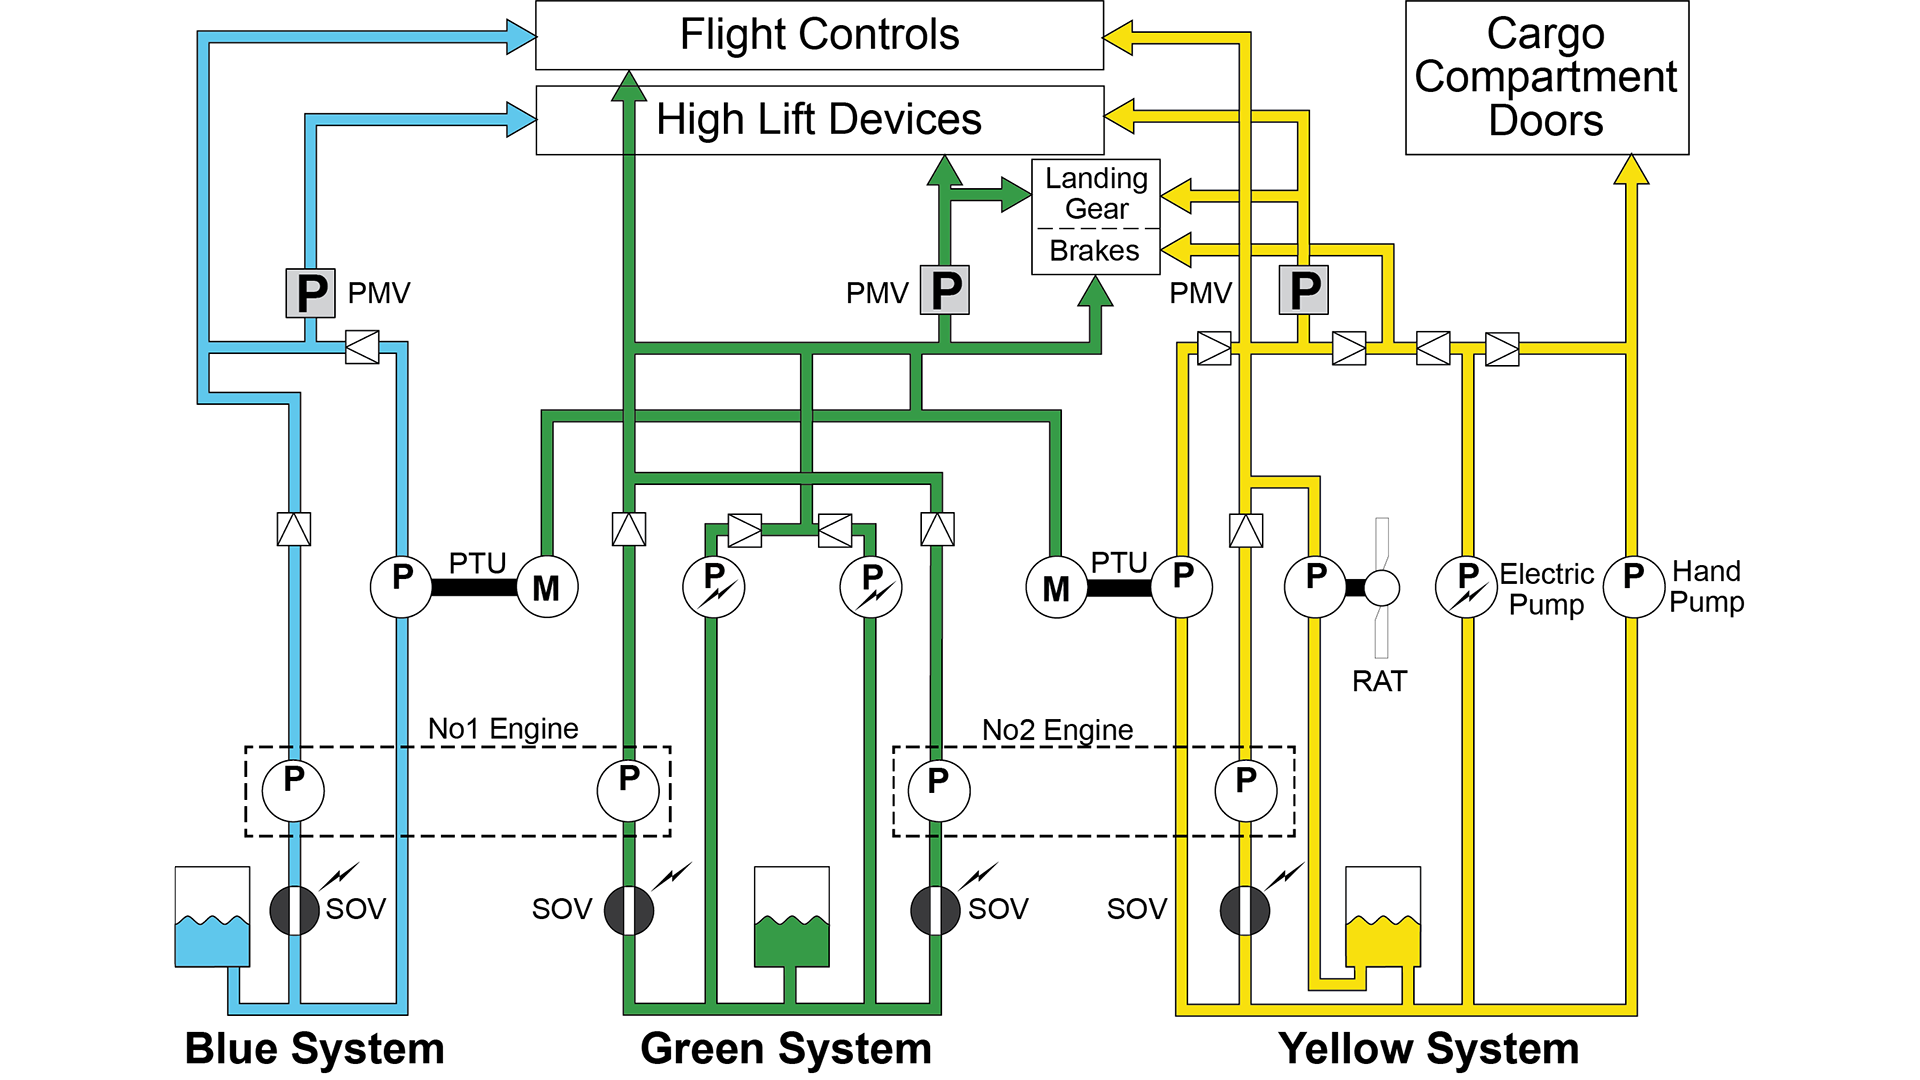 2 engined aircraft Hydraulic Systems